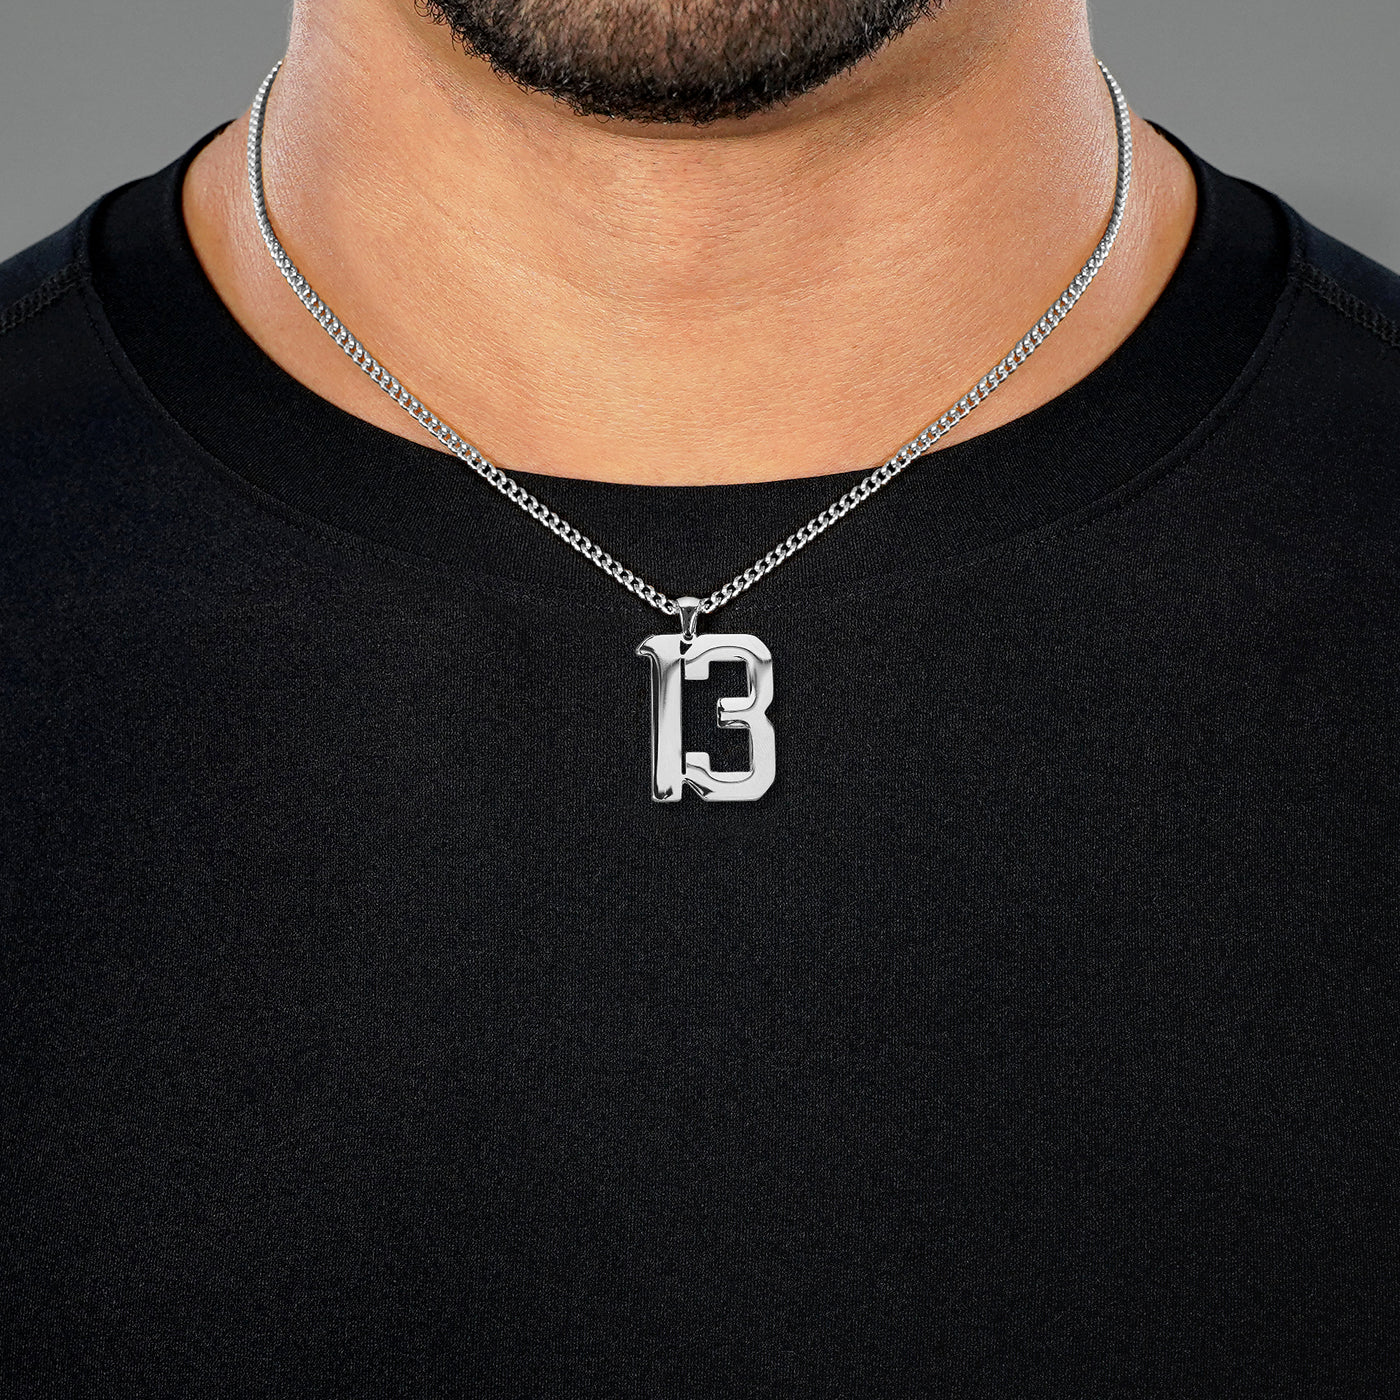 13 Number Pendant with Chain Necklace - Stainless Steel